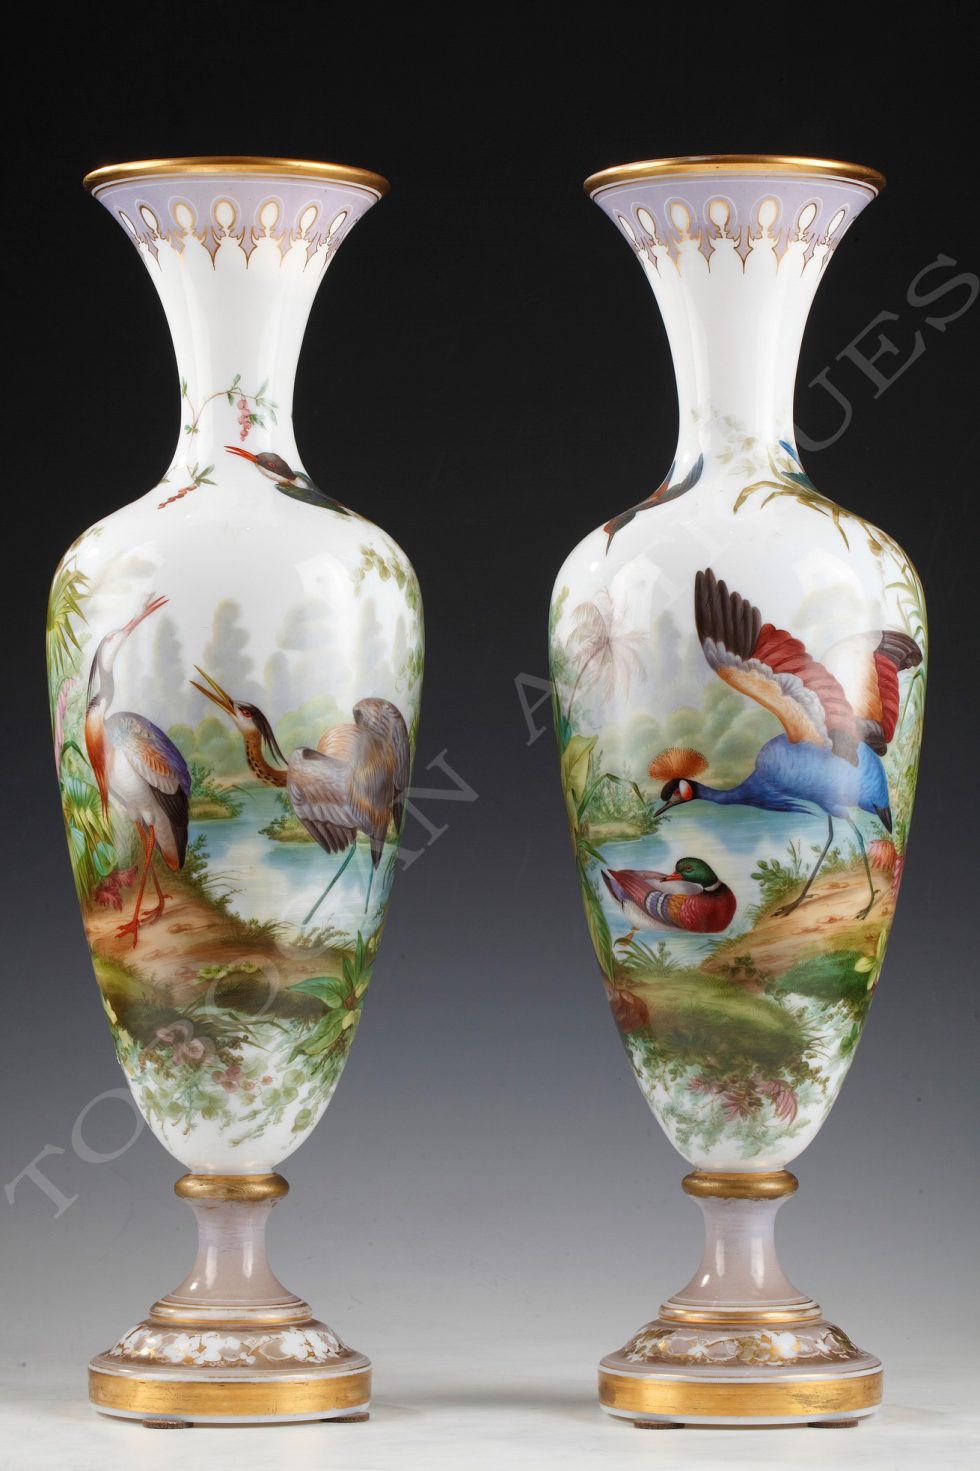 Baccarat <br/> Pair of opal glass vases